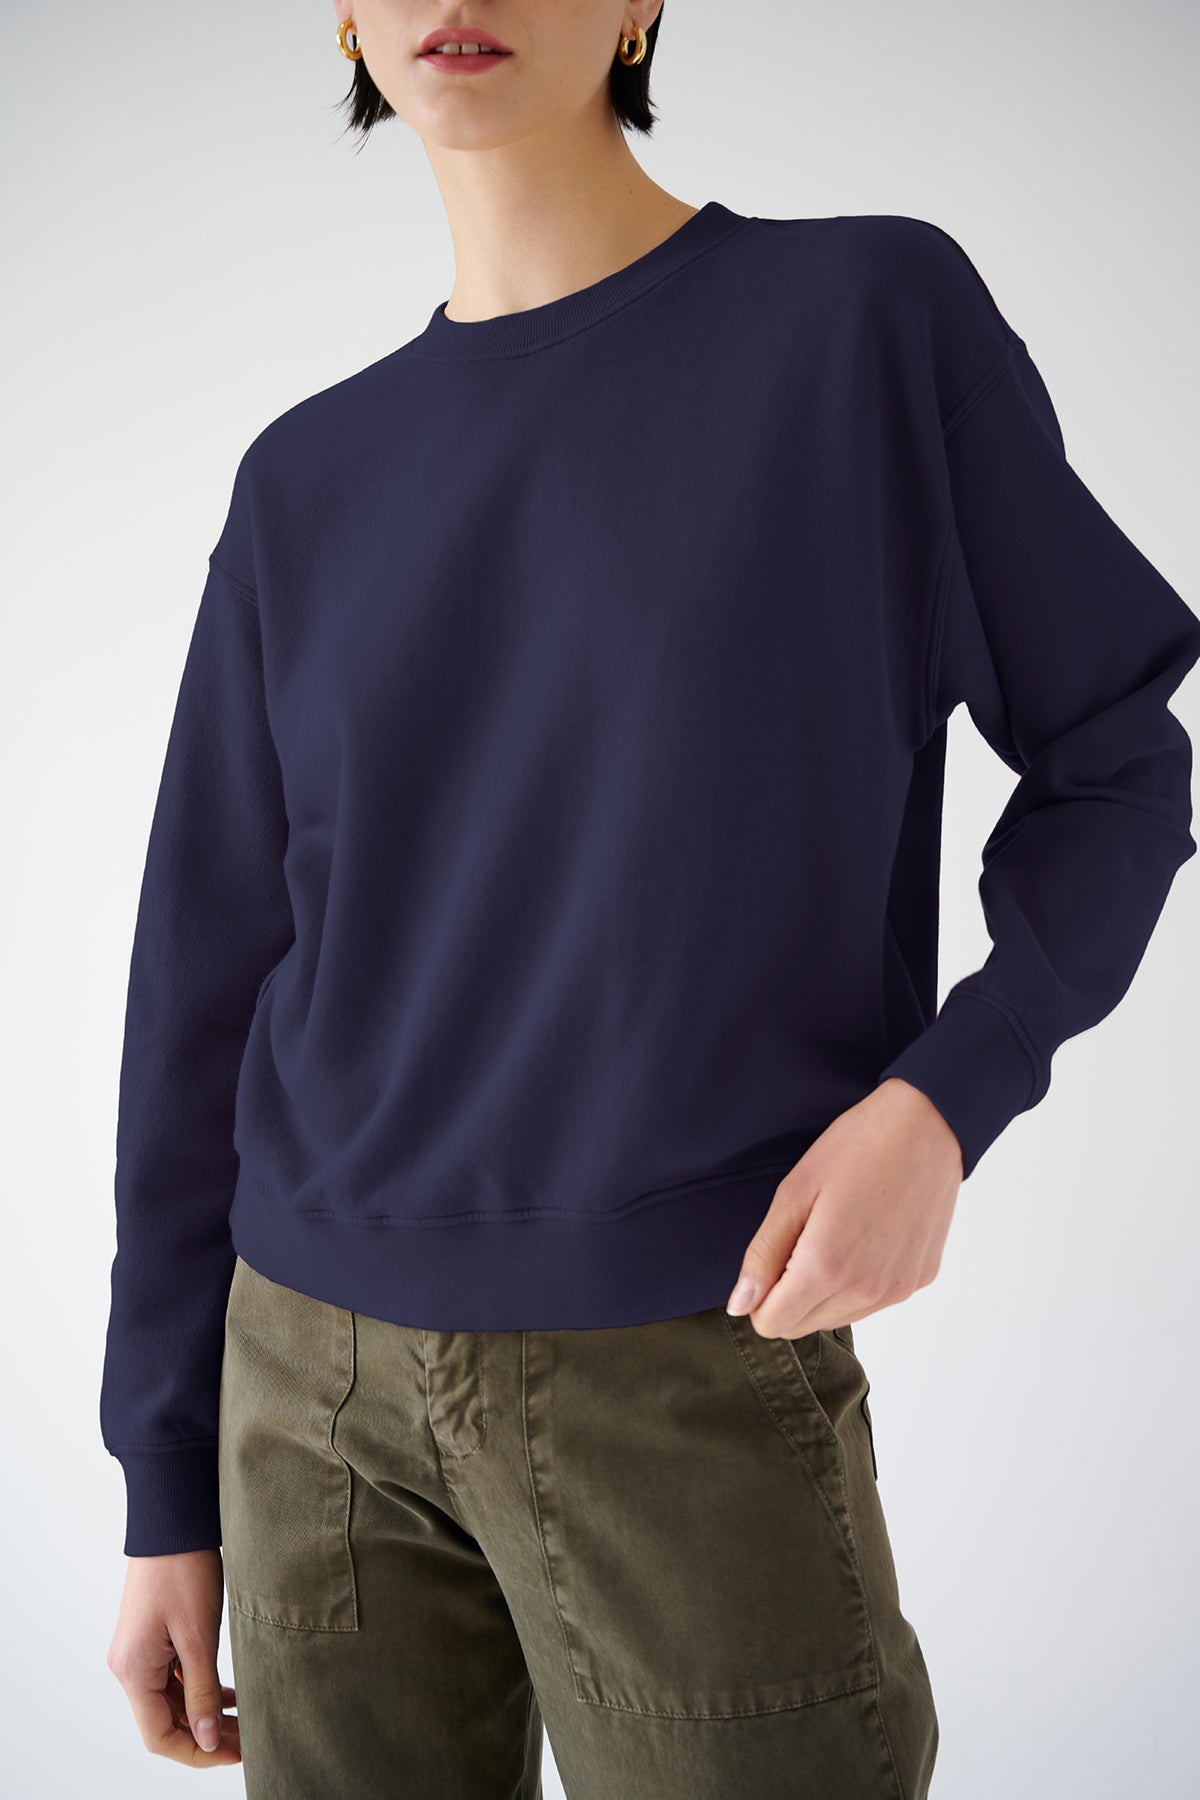   A woman in a dark blue Velvet by Jenny Graham YNEZ SWEATSHIRT made from organic cotton and olive green cargo pants against a light background. Only her torso is visible. 